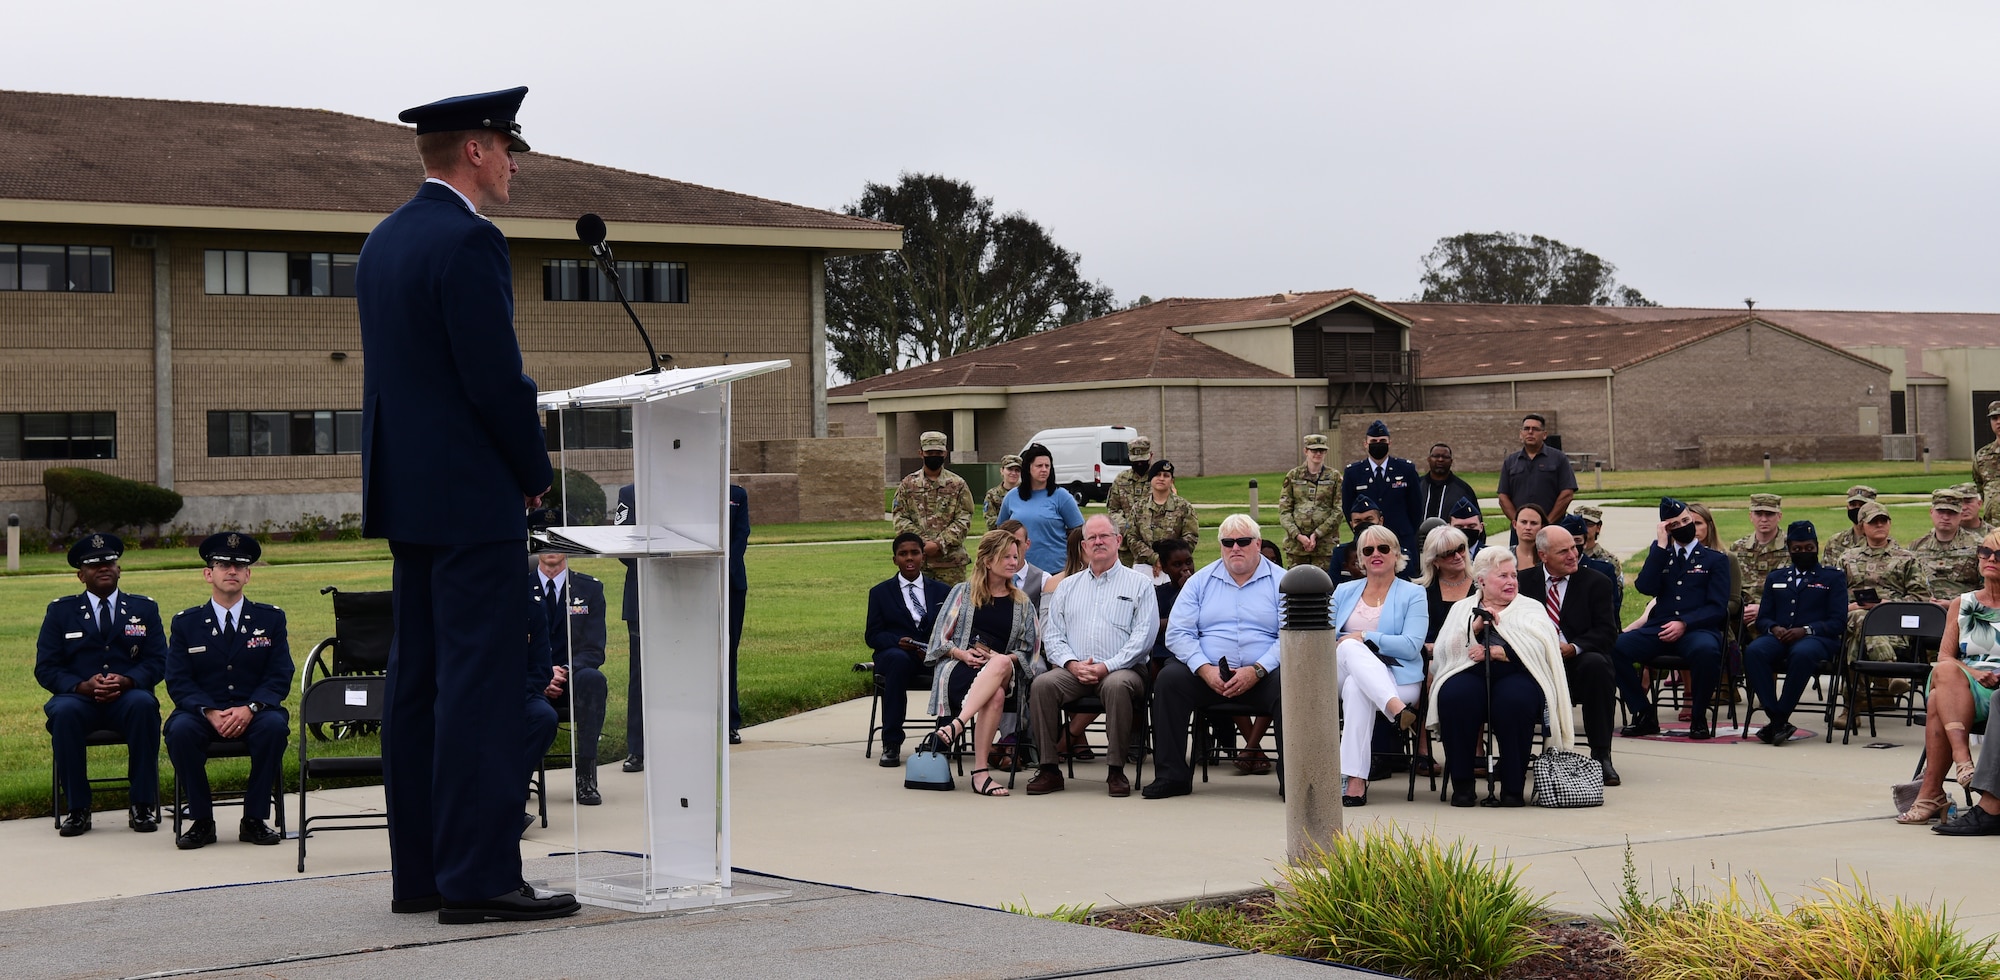 Col. Jason Schramm, Commander of Delta 1, greeted and spoke to the audience during the assumption of command at Vandenberg Space Force Base, September 2, 2021.